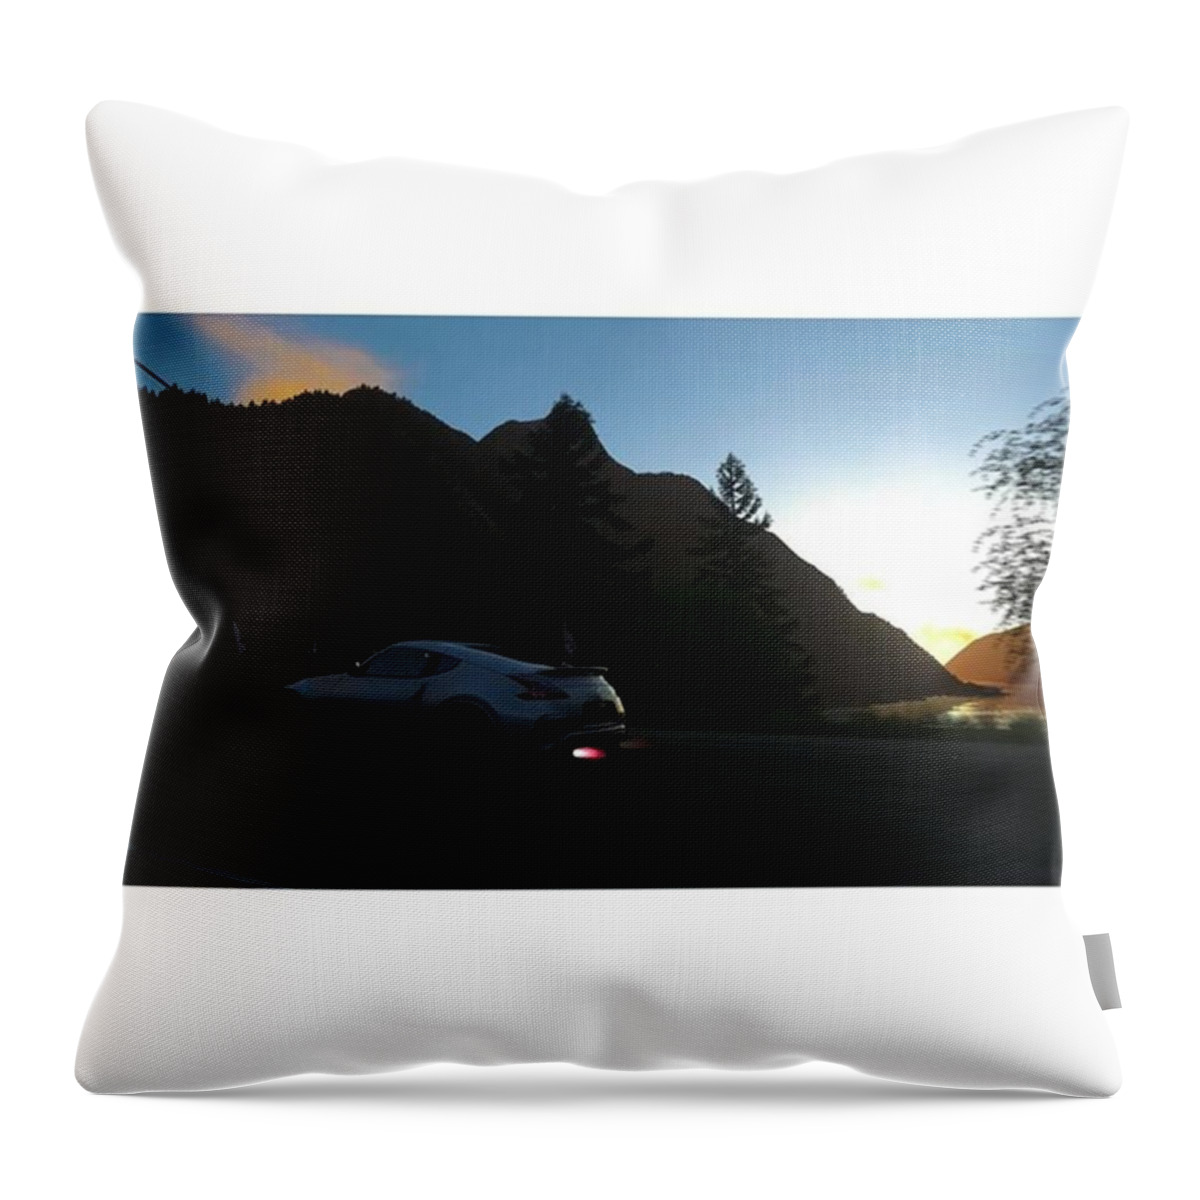 Nismo Throw Pillow featuring the photograph Little Flame While #shifting. #nissan by Hannes Lachner